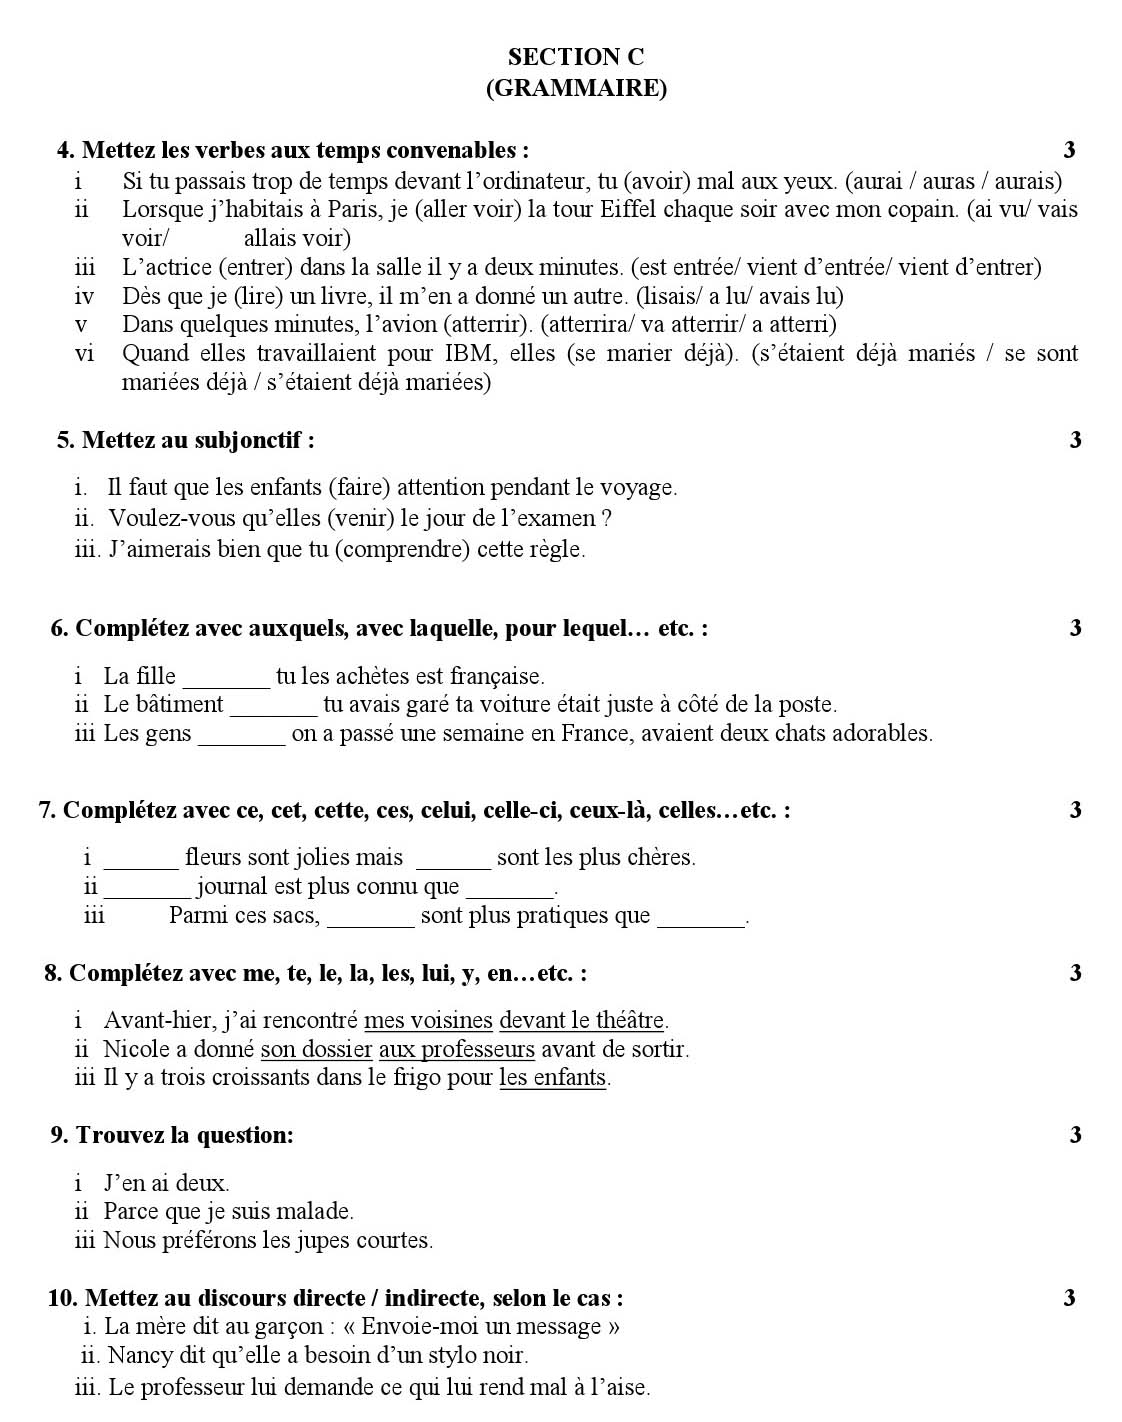 French CBSE Class X Sample Question Paper 2018-19 - Image 3